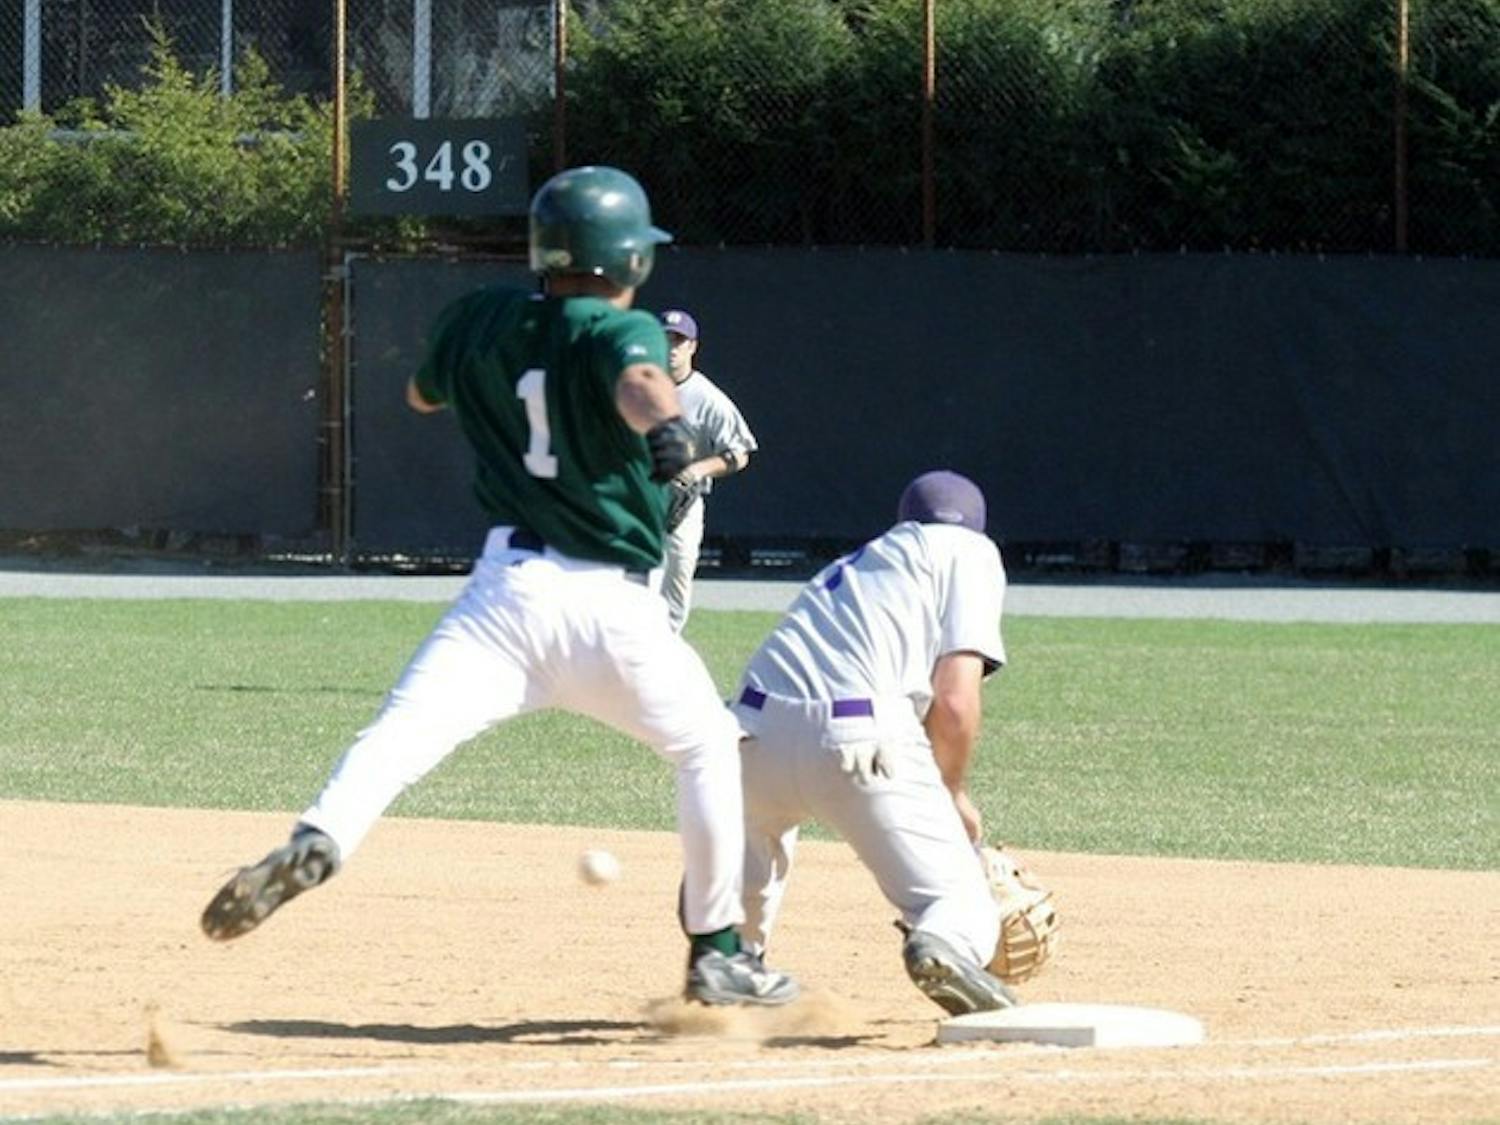 Dartmouth baseball came up inches short against Holy Cross Wednesday after a Crusaders' ninth-inning grand slam earned them an 8-6 victory.